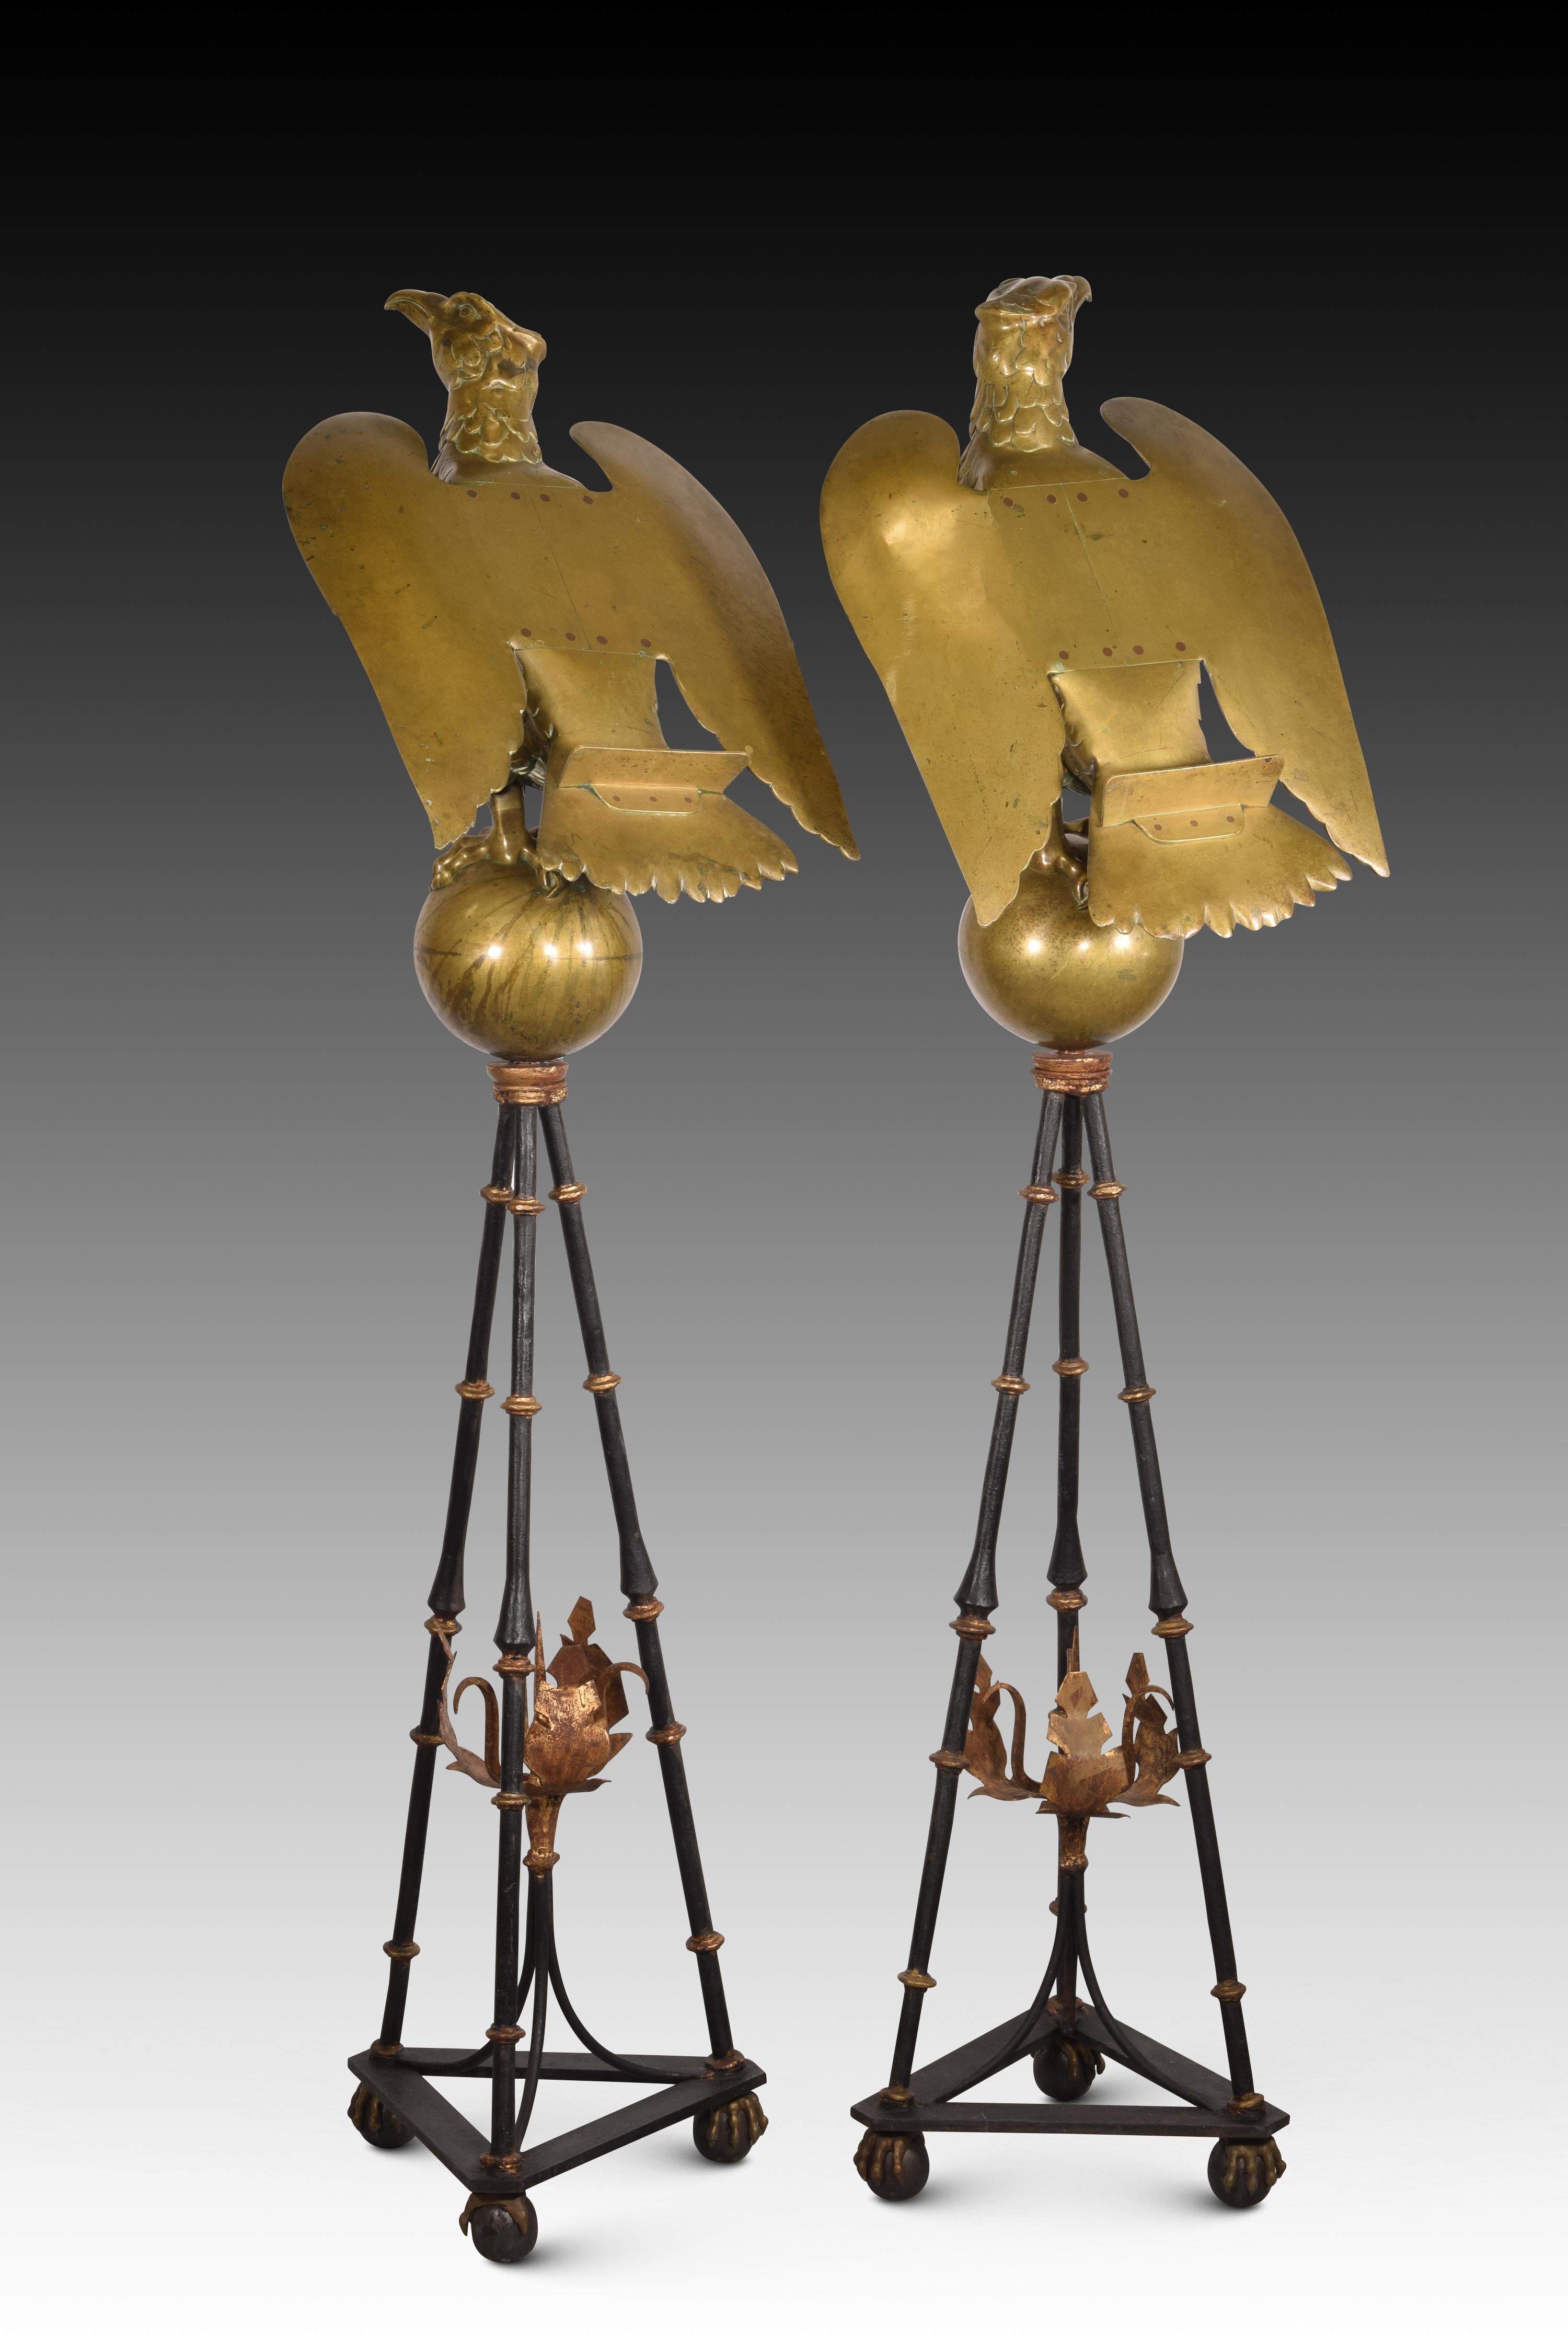 Pair of easels in the shape of an eagle. Bronze, iron. 16th-17th century.
 Rear supports. 
Pair of lecterns with tripod-shaped bases, claw-shaped legs with spheres, and a triangular part from which three baluster-shaped legs emerge, with elements